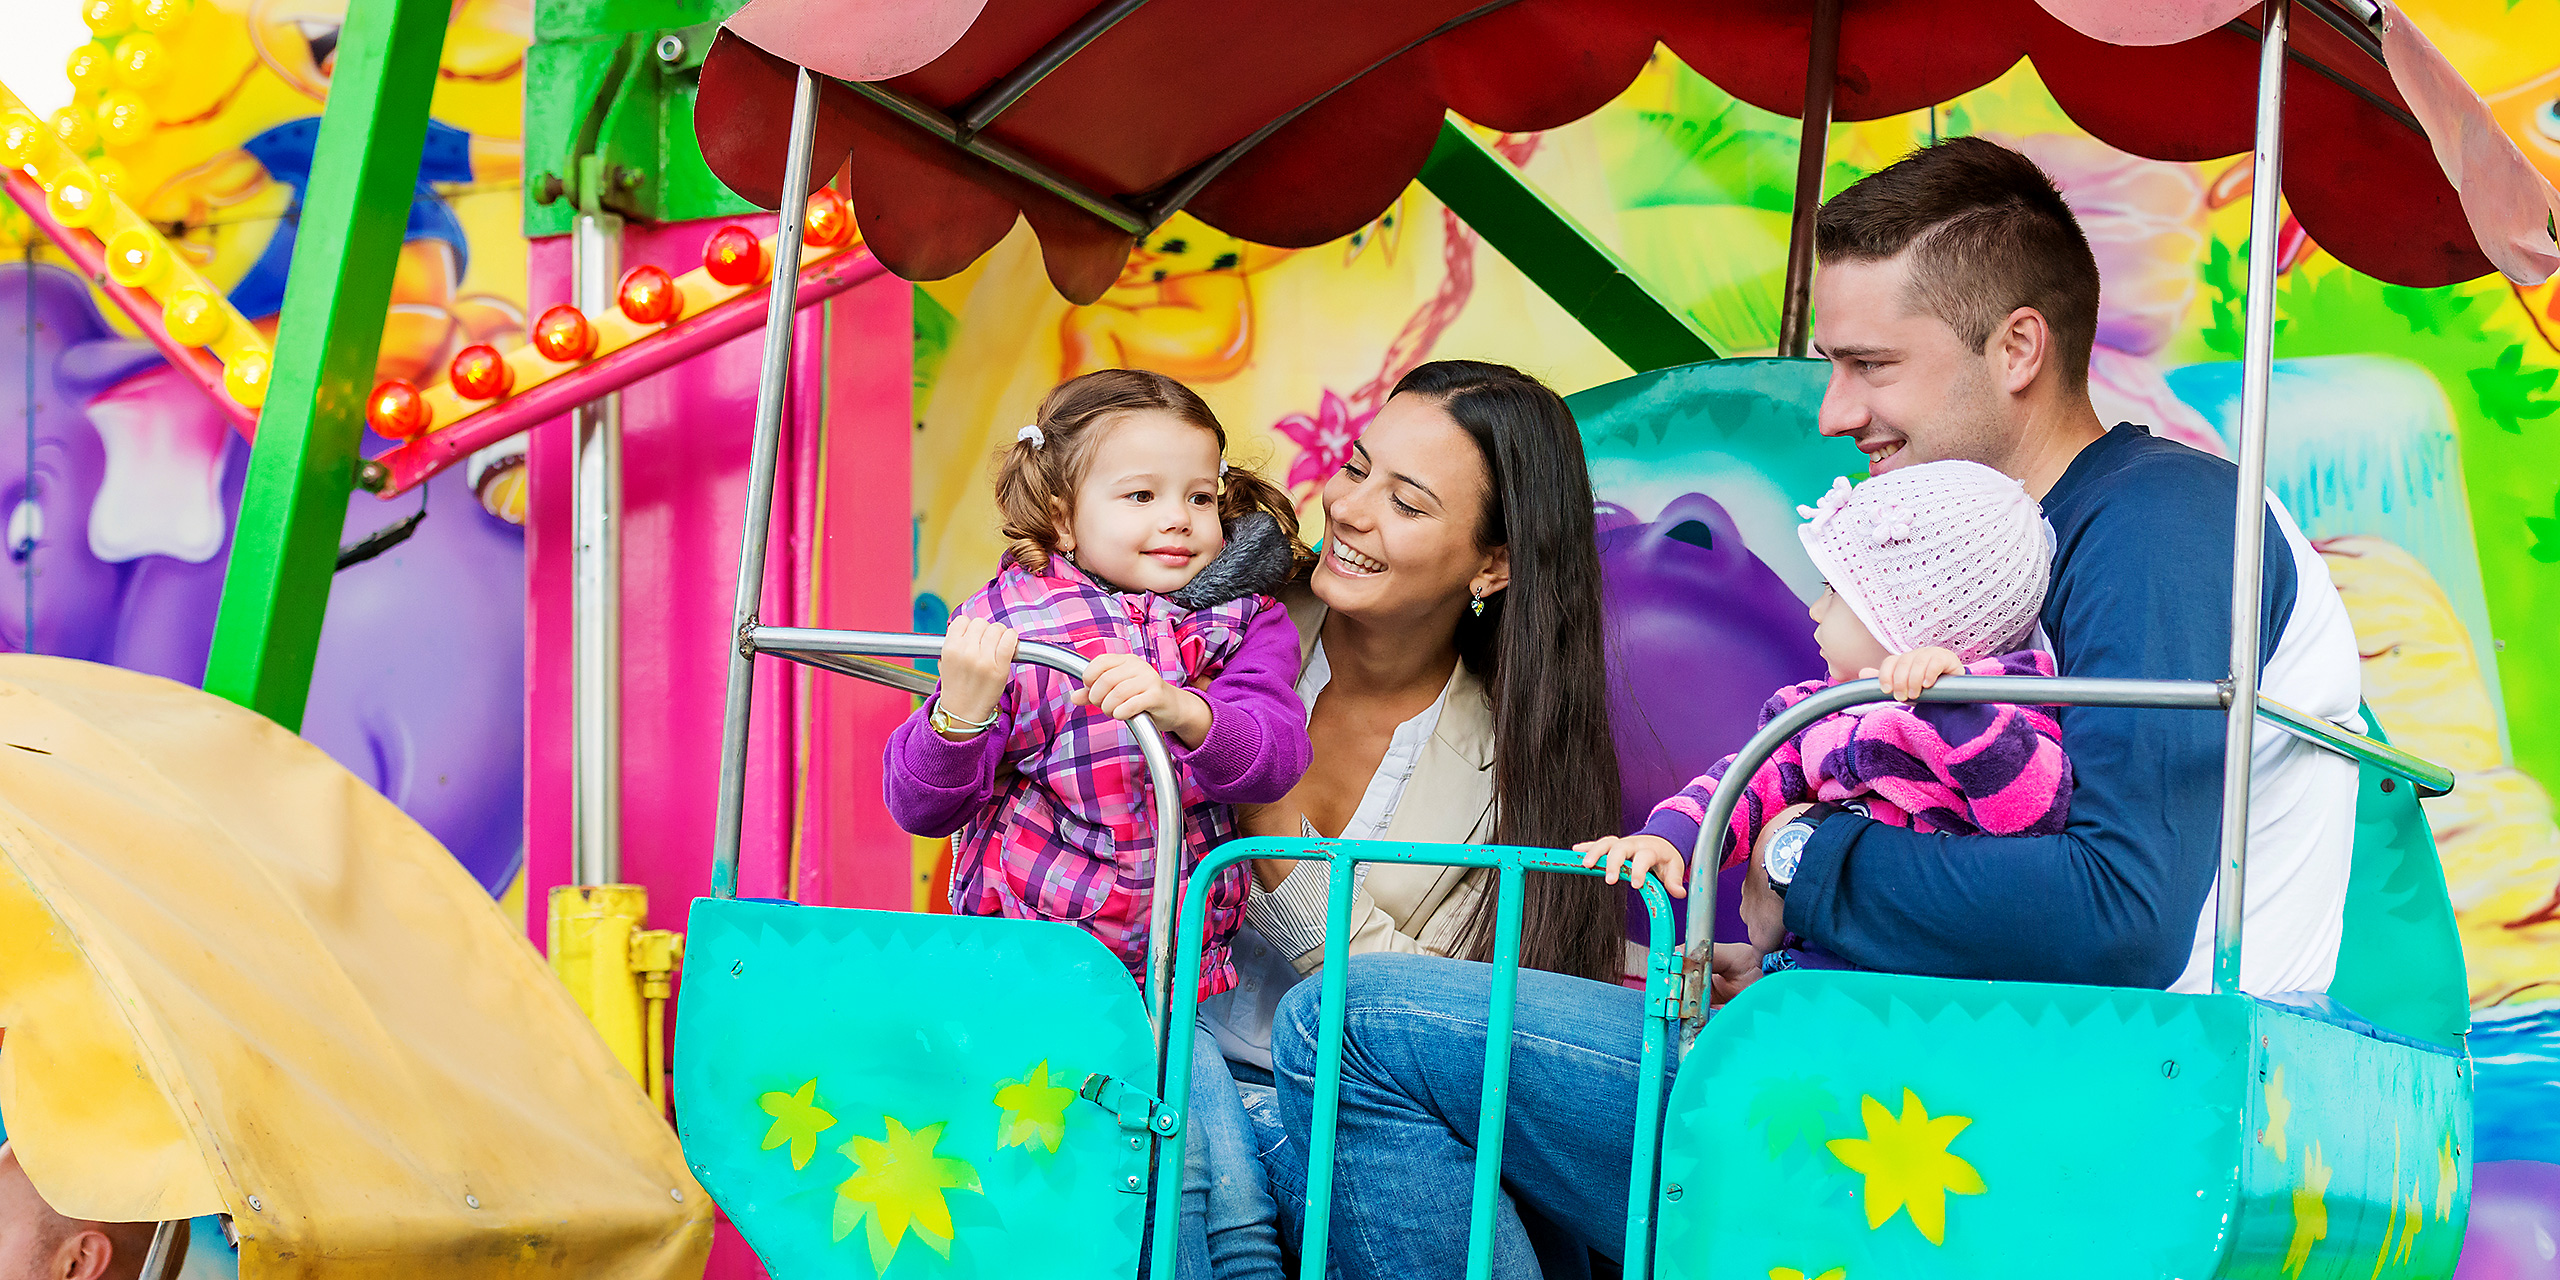 12 Best Amusement Parks for Toddlers and Young Kids 2020 |